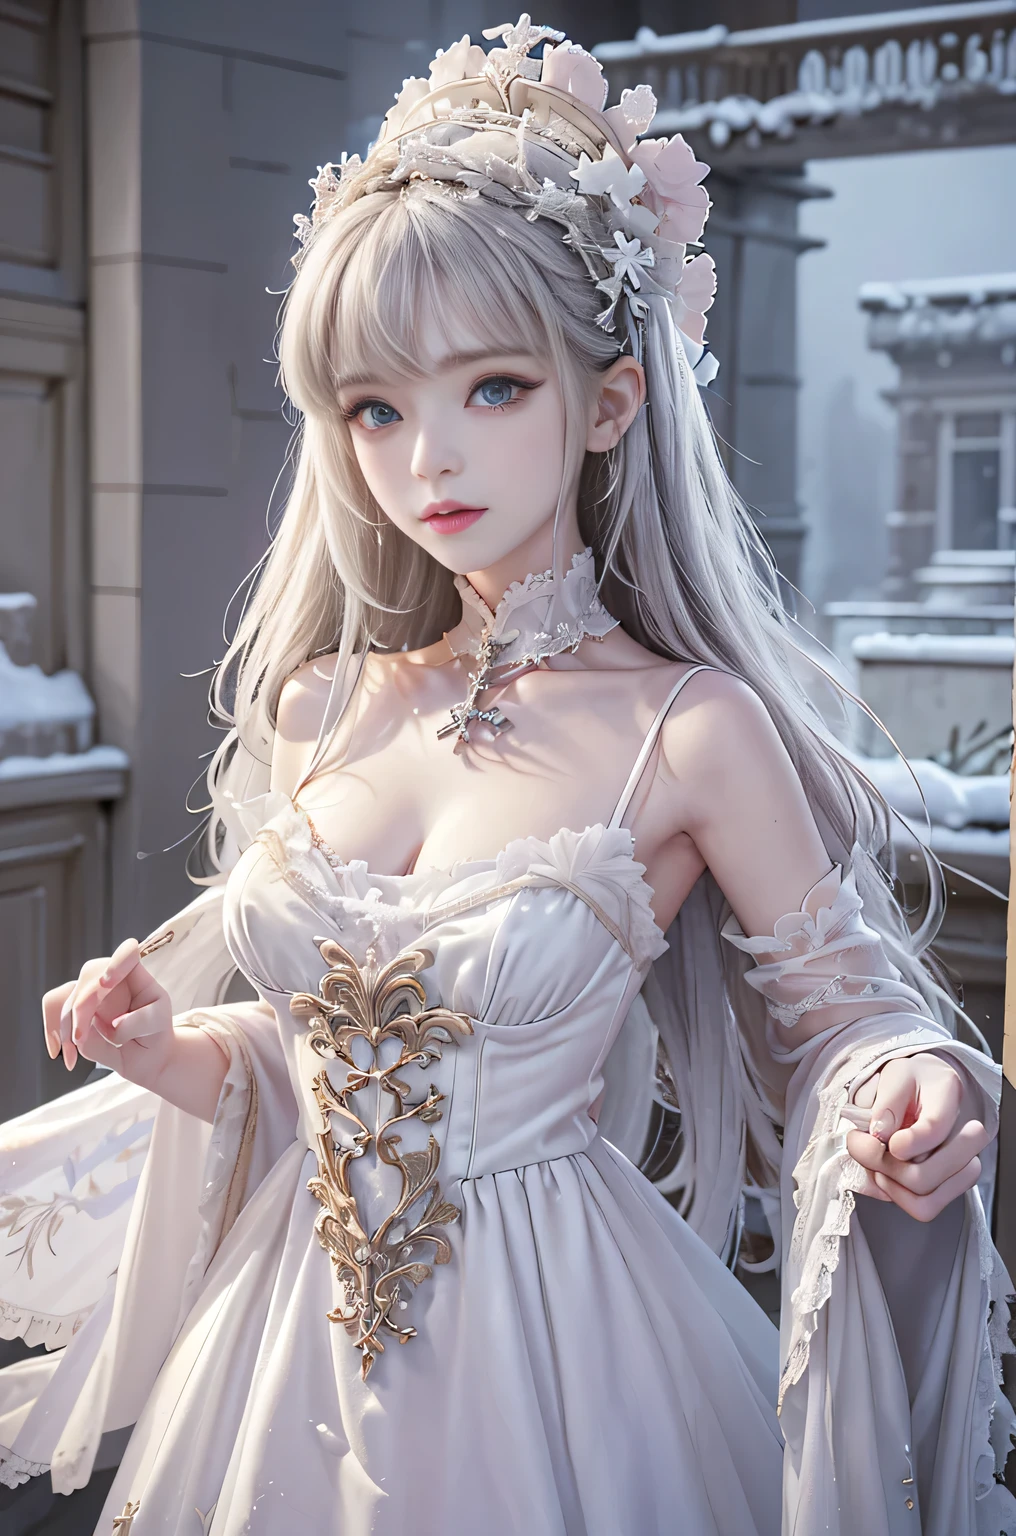 ((masterpiece:1.5,highest quality,Highly detailed images,Beautiful images、Realistic、Photorealistic、2.5D))(1girl, solo)(cute girl, medium breasts, white hair, aqua eyes、Beautiful big eyes、Sharp jaw、Small Nose、Narrow waist、Thin legs、Ideal body type、The collarbone is beautiful)(lolita fashion、Cape、Heavy coat、Snow Field、Gothic Style)(Beautiful, shining hair, floating hair)(heavy snow、dead tree)
